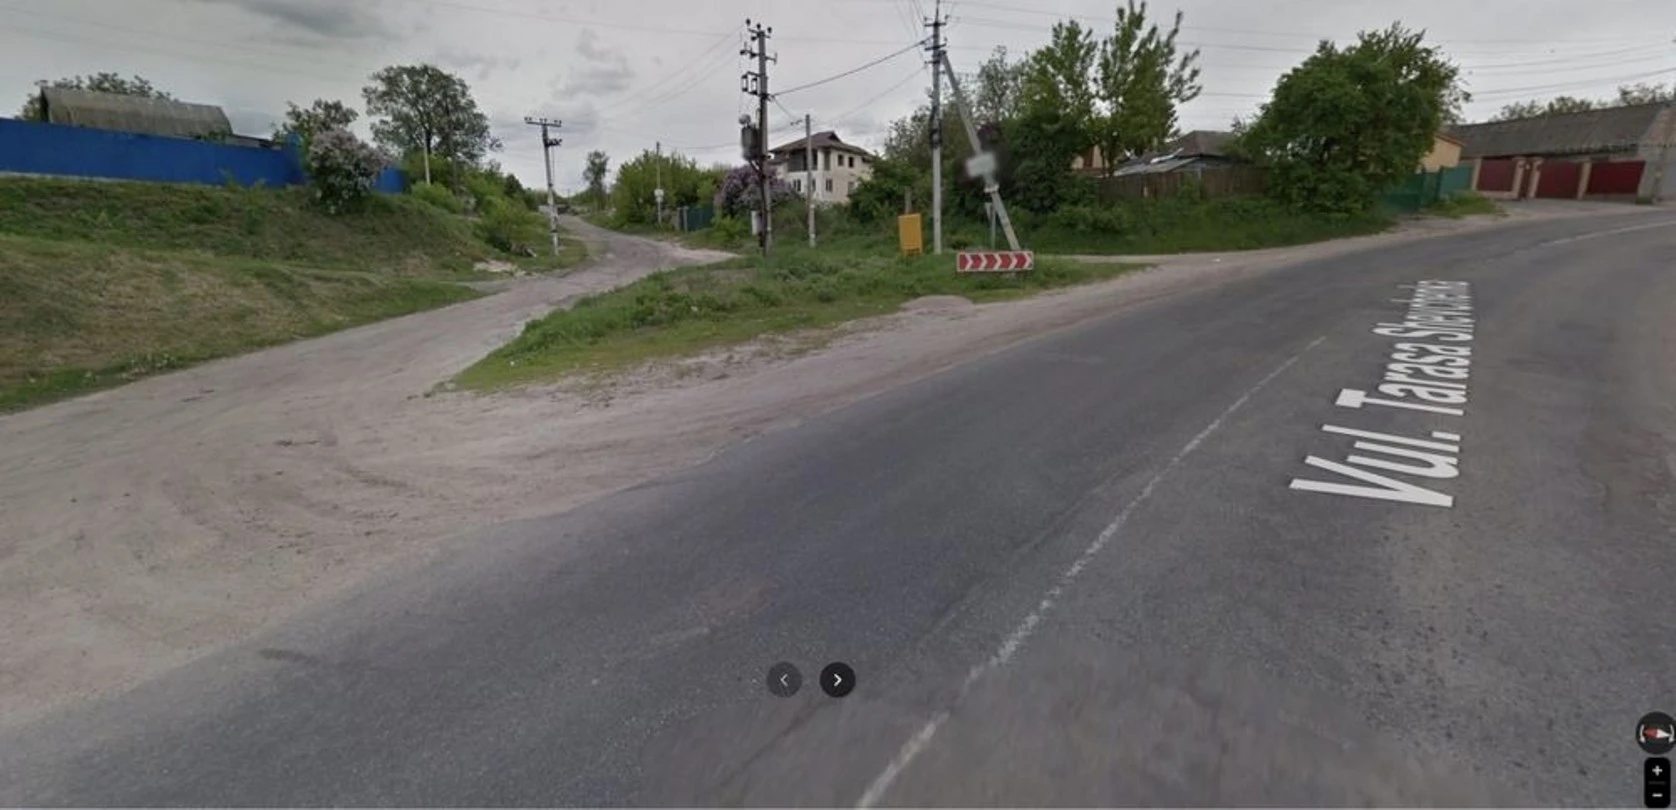 Land for sale for residential construction. Yurivka. 